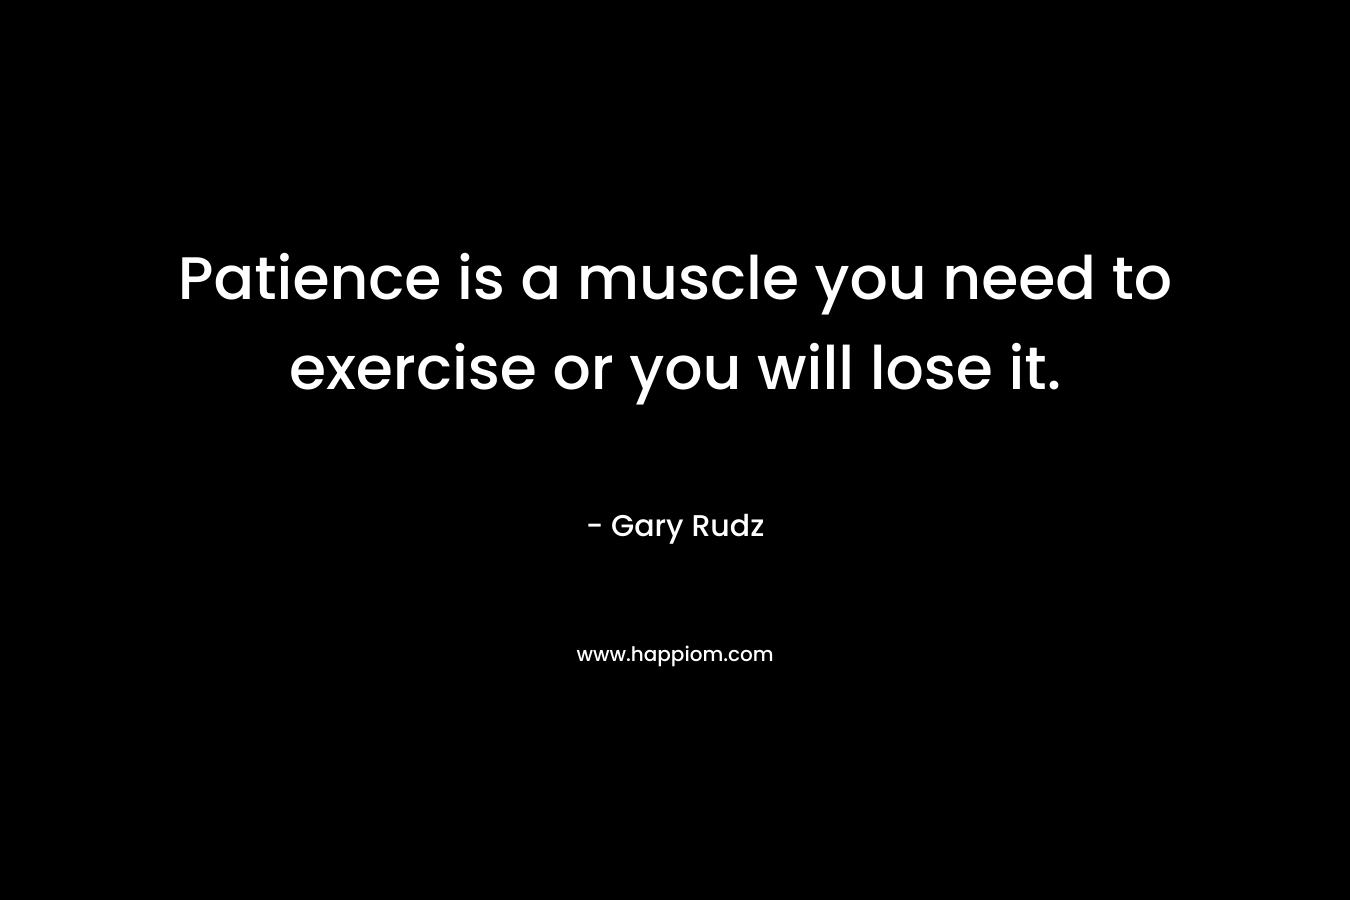 Patience is a muscle you need to exercise or you will lose it. – Gary Rudz